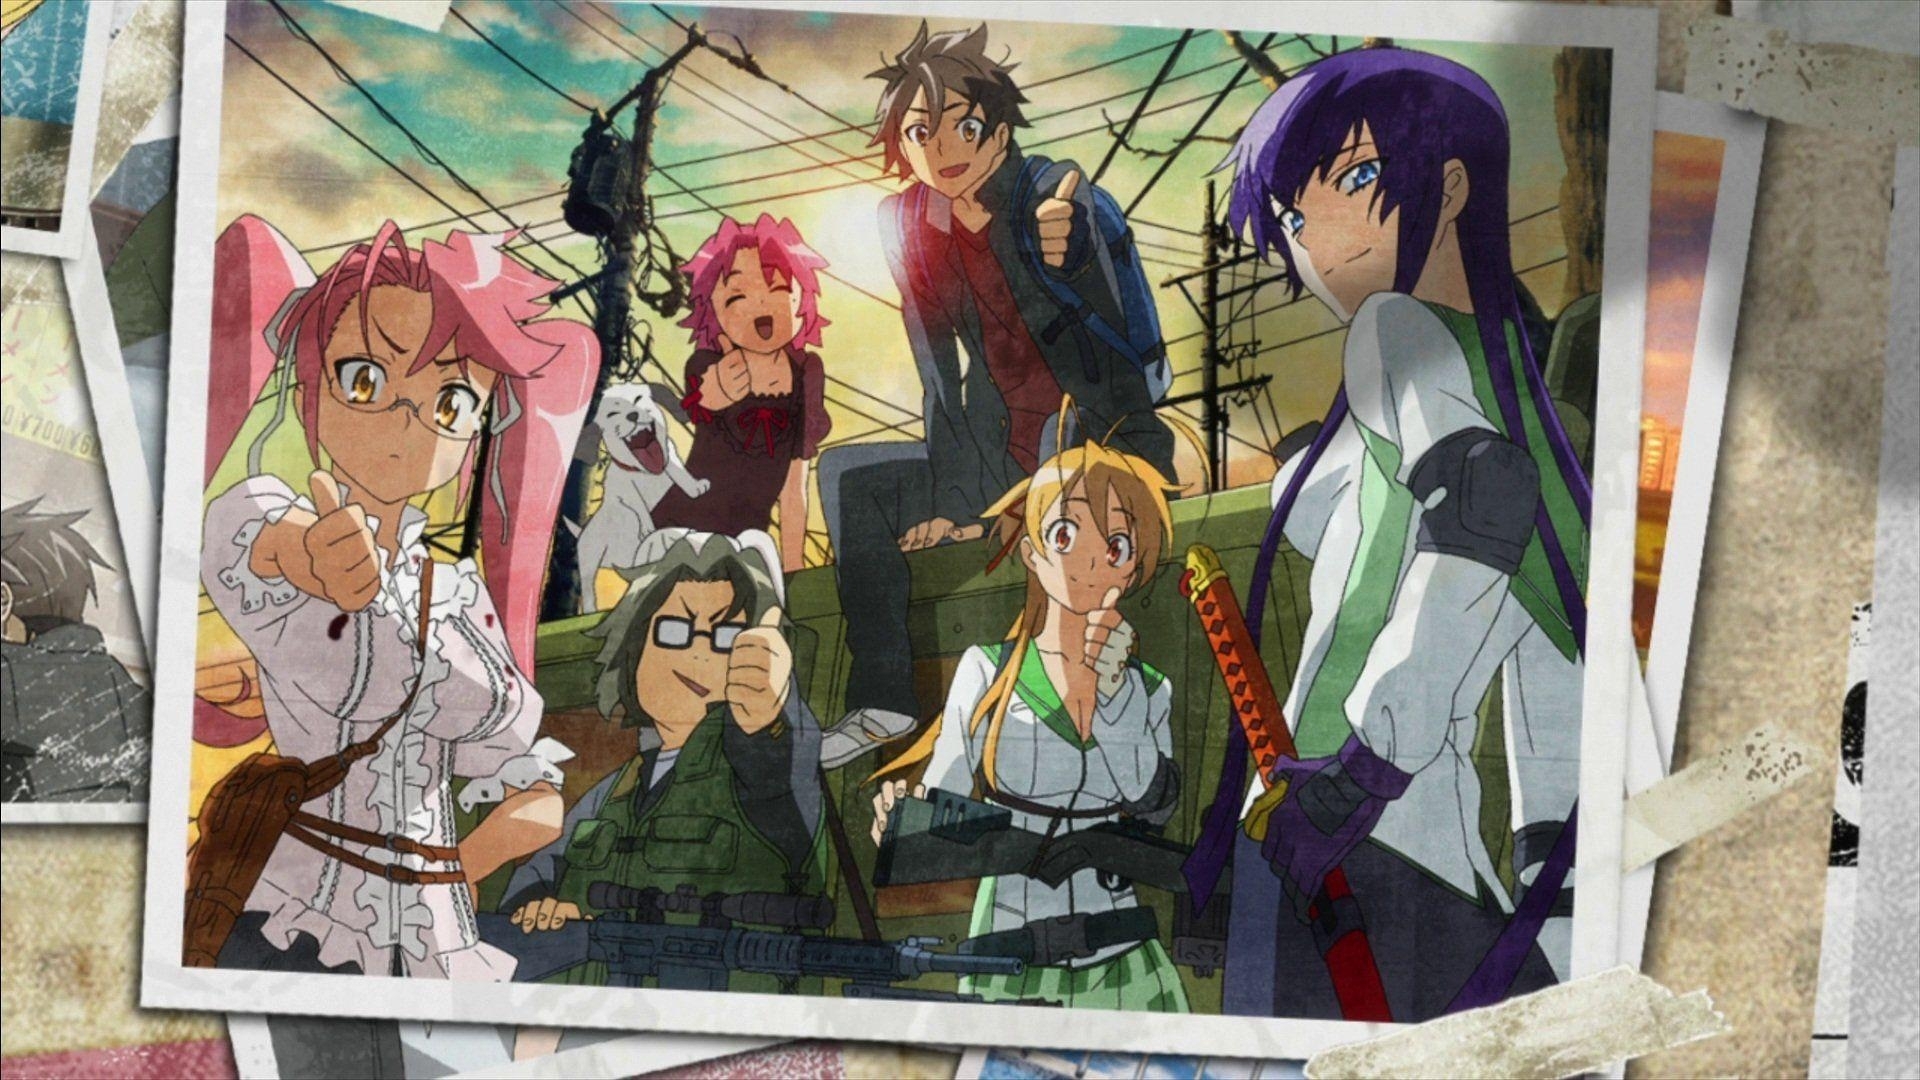 10 New Highschool Of The Dead Wallpaper FULL HD 1080p For PC Background